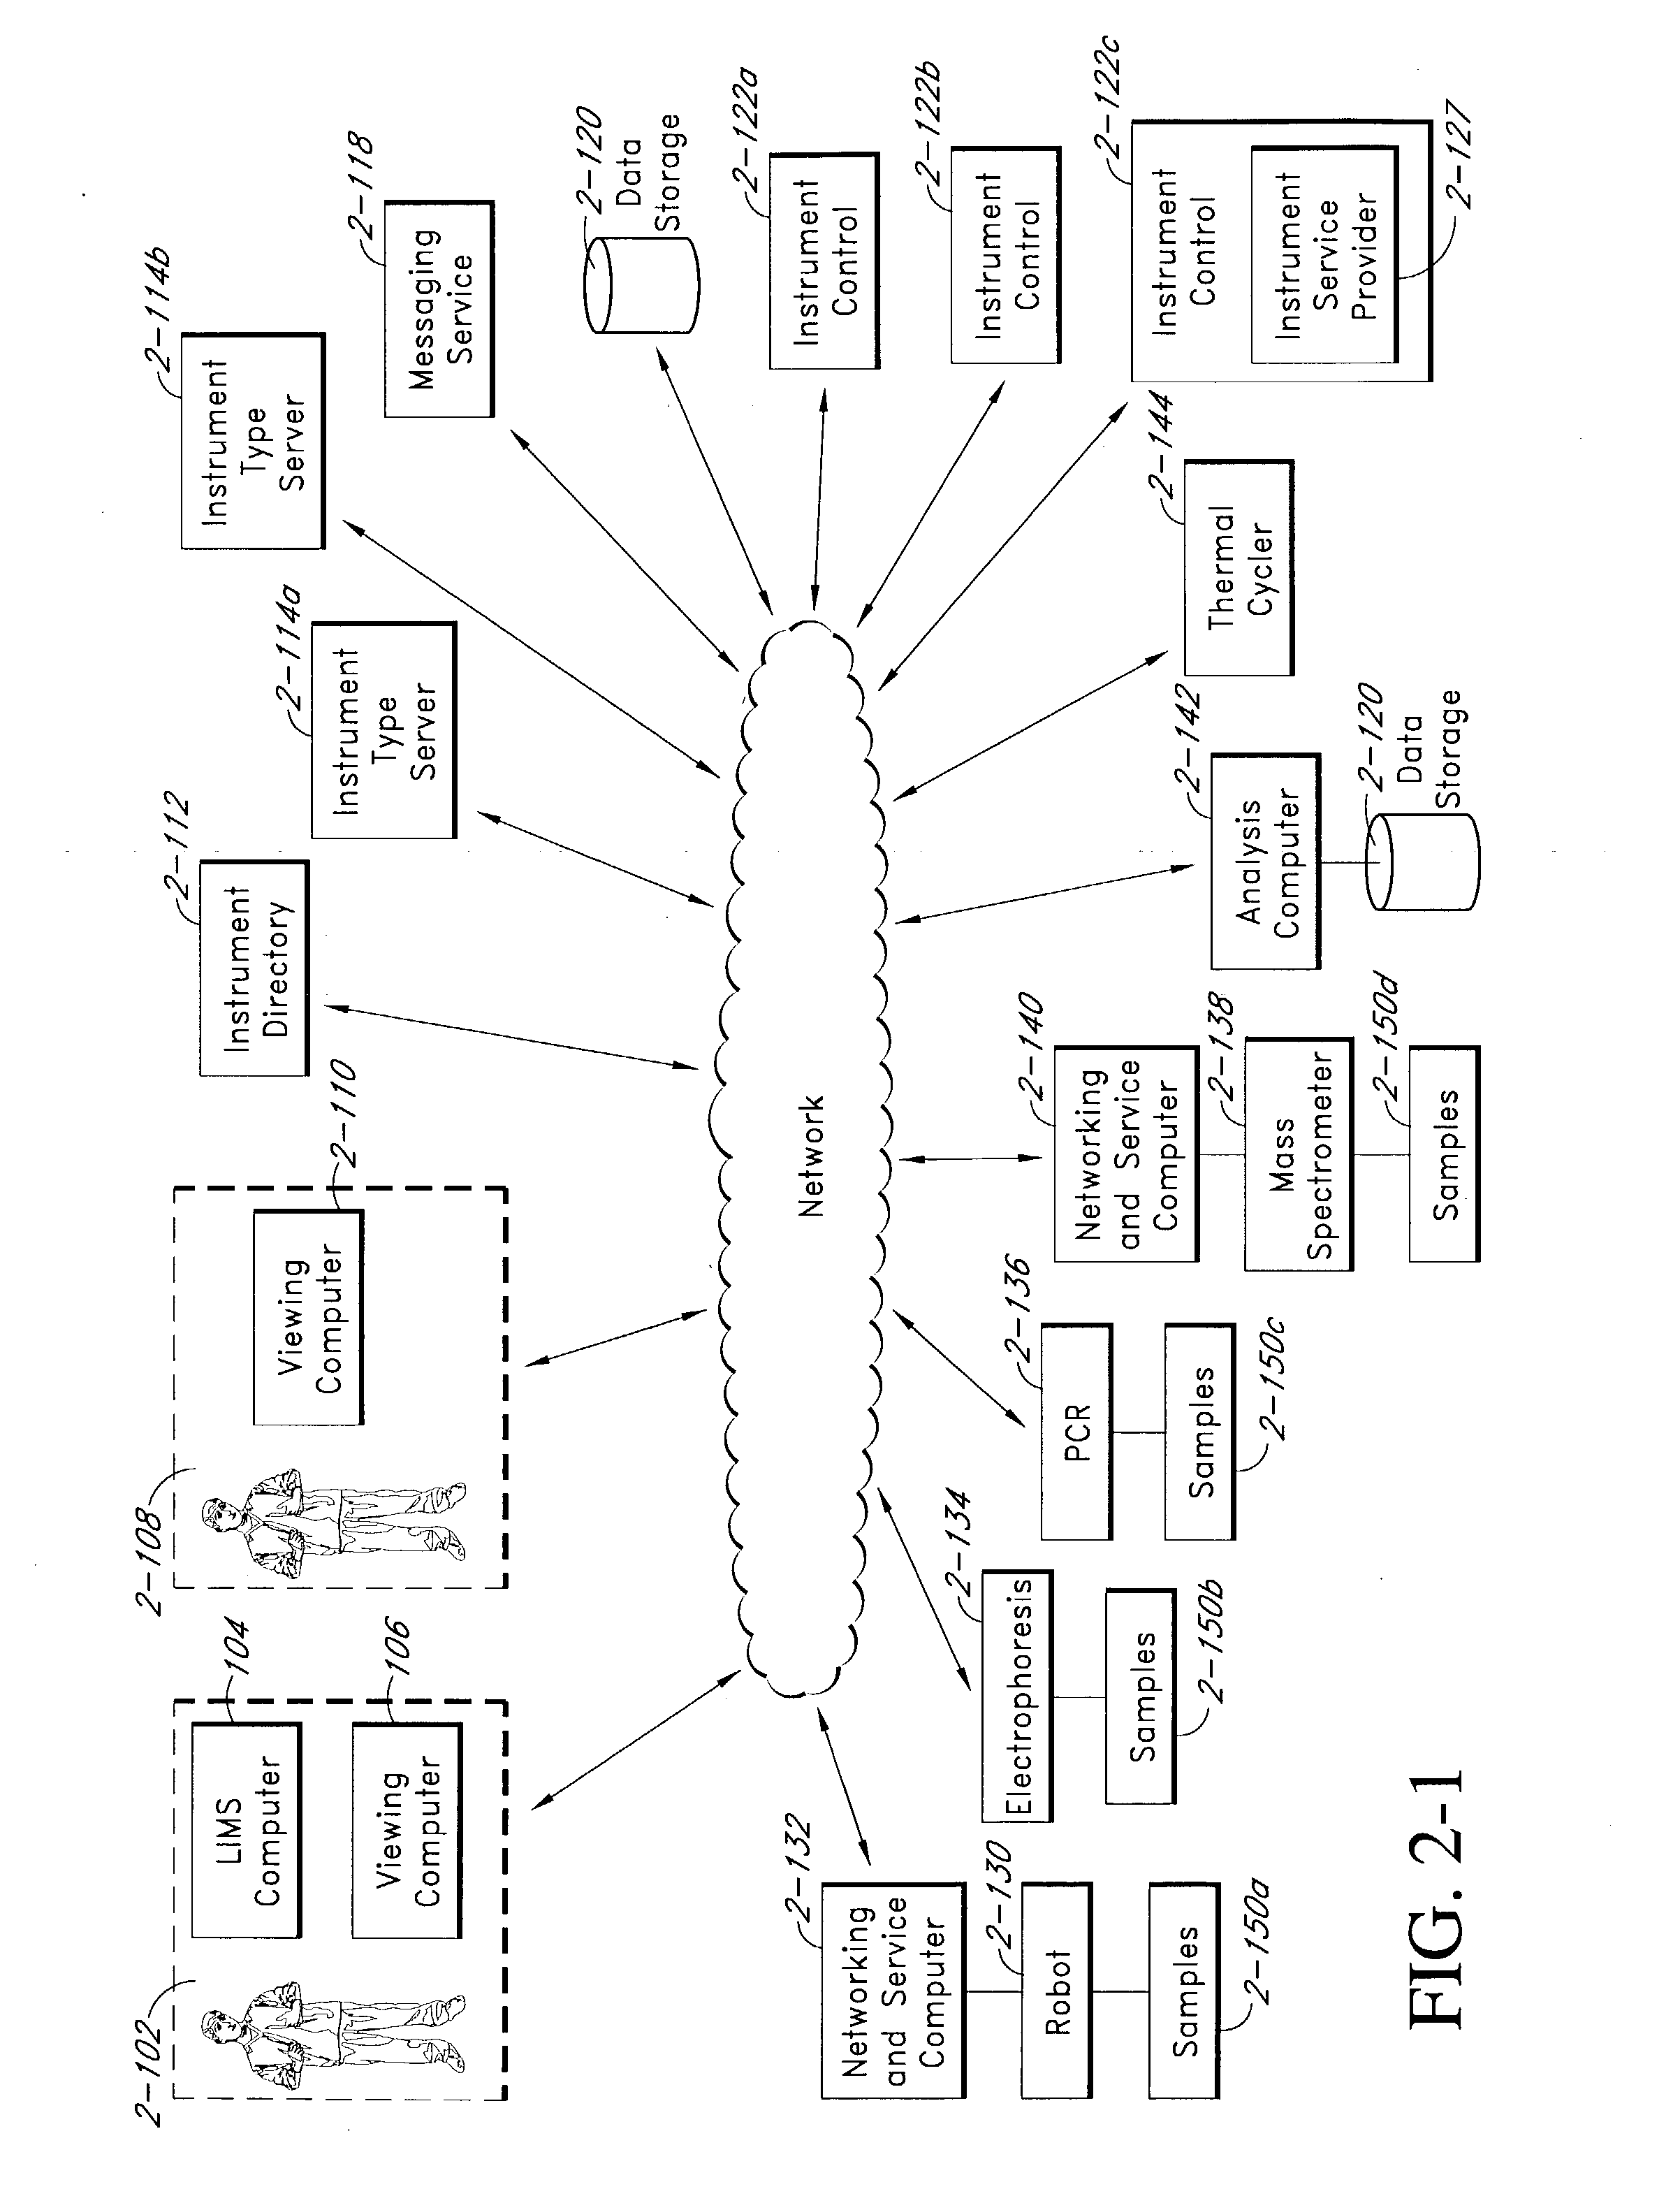 System and method for providing a standardized state interface for instrumentation